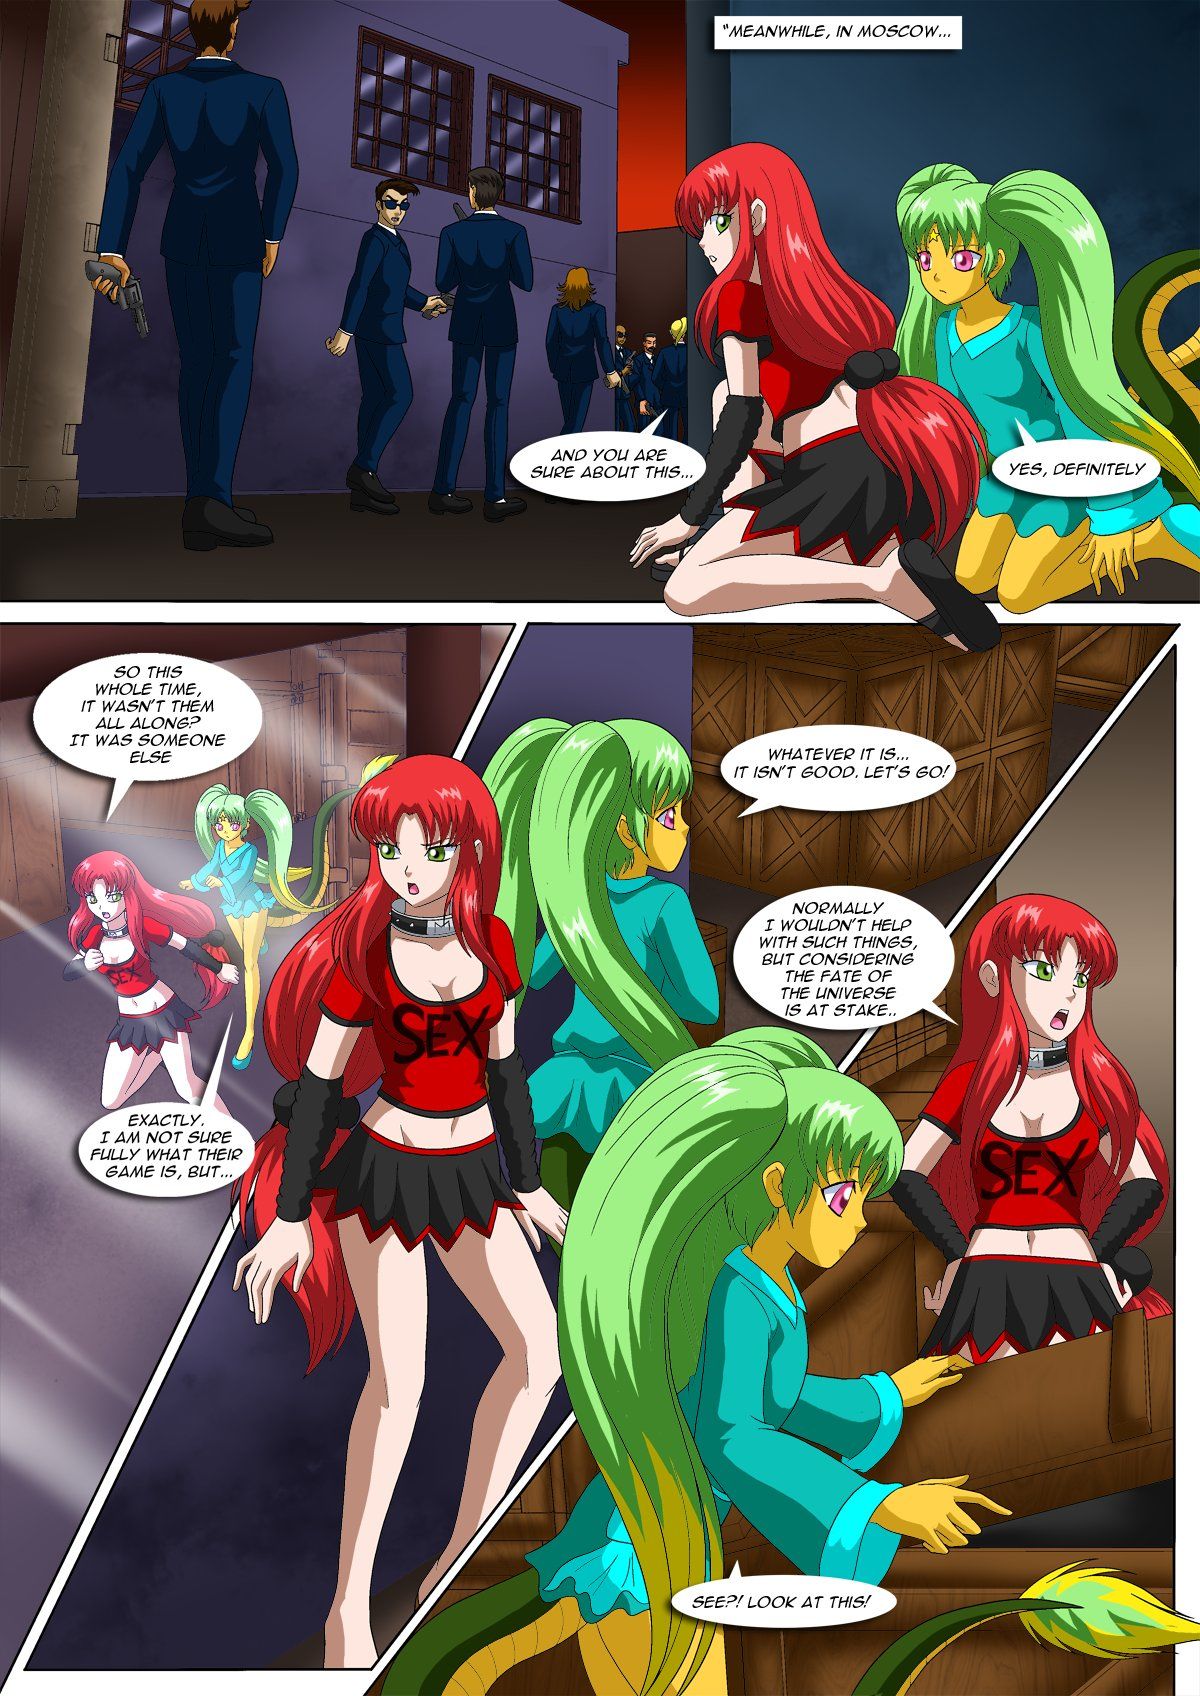 The Carnal Kingdom 6 - Angels and Demons page 36